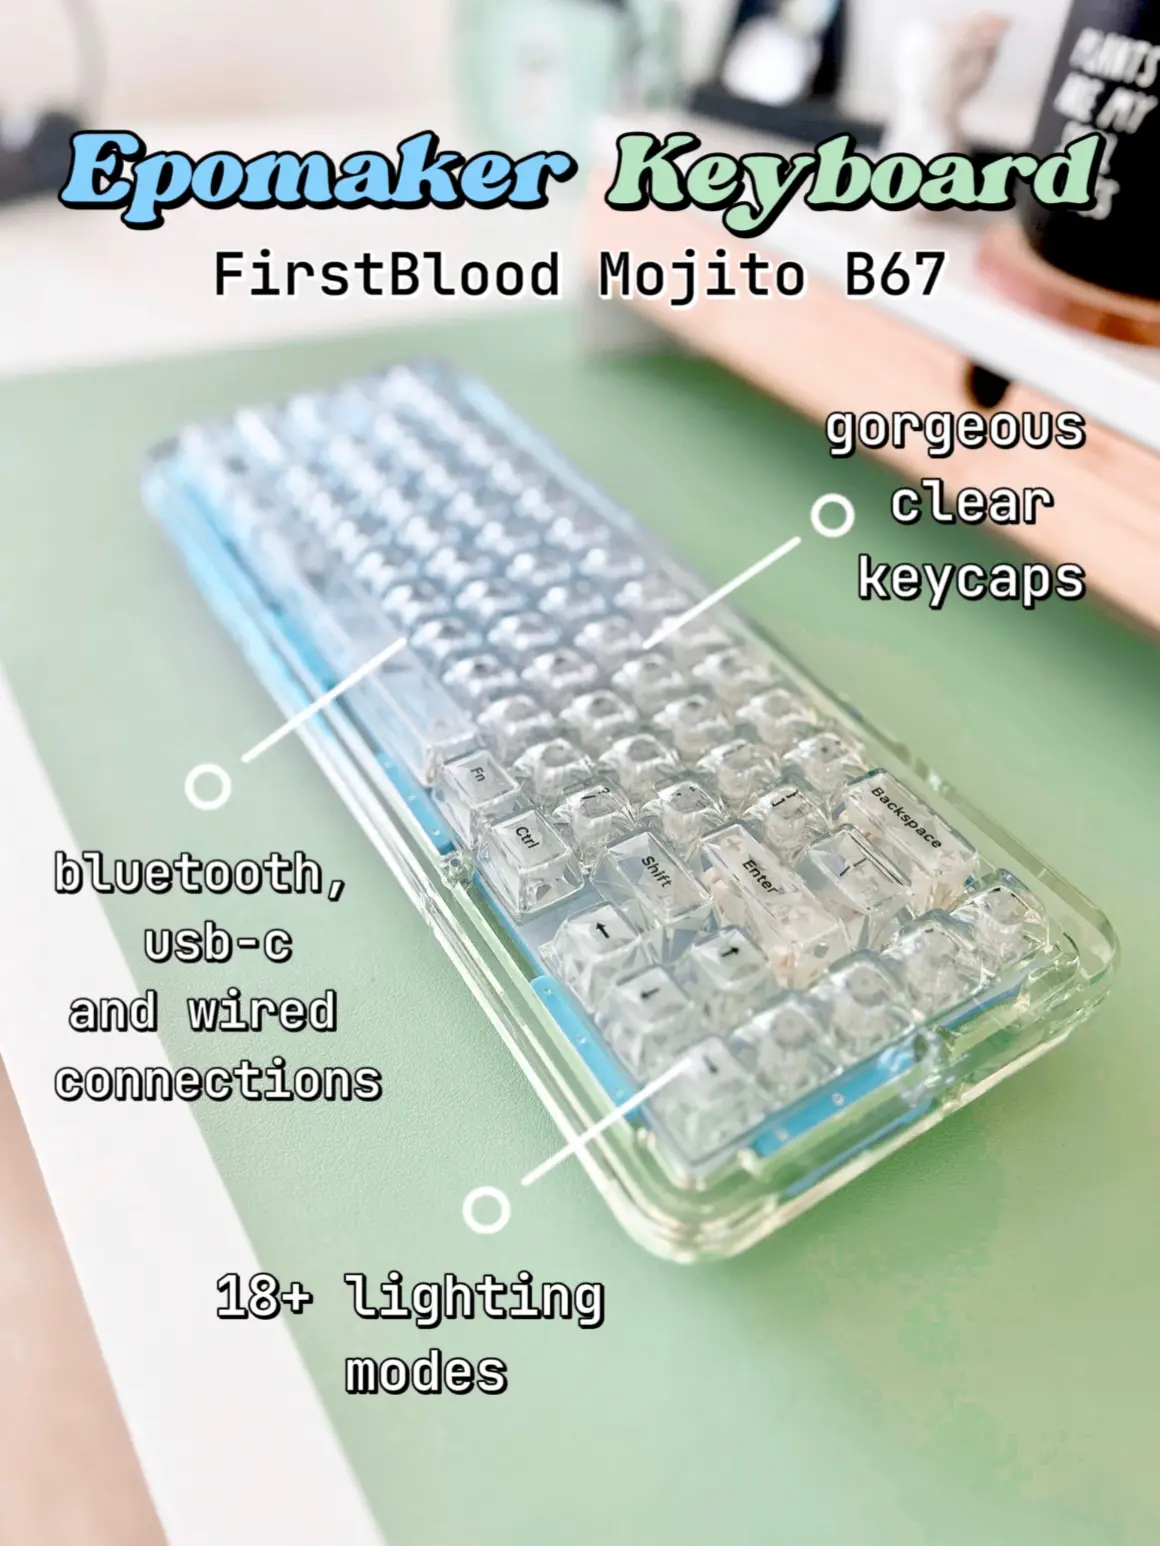 Epomaker FirstBlood Mojito B67 Keyboard Review